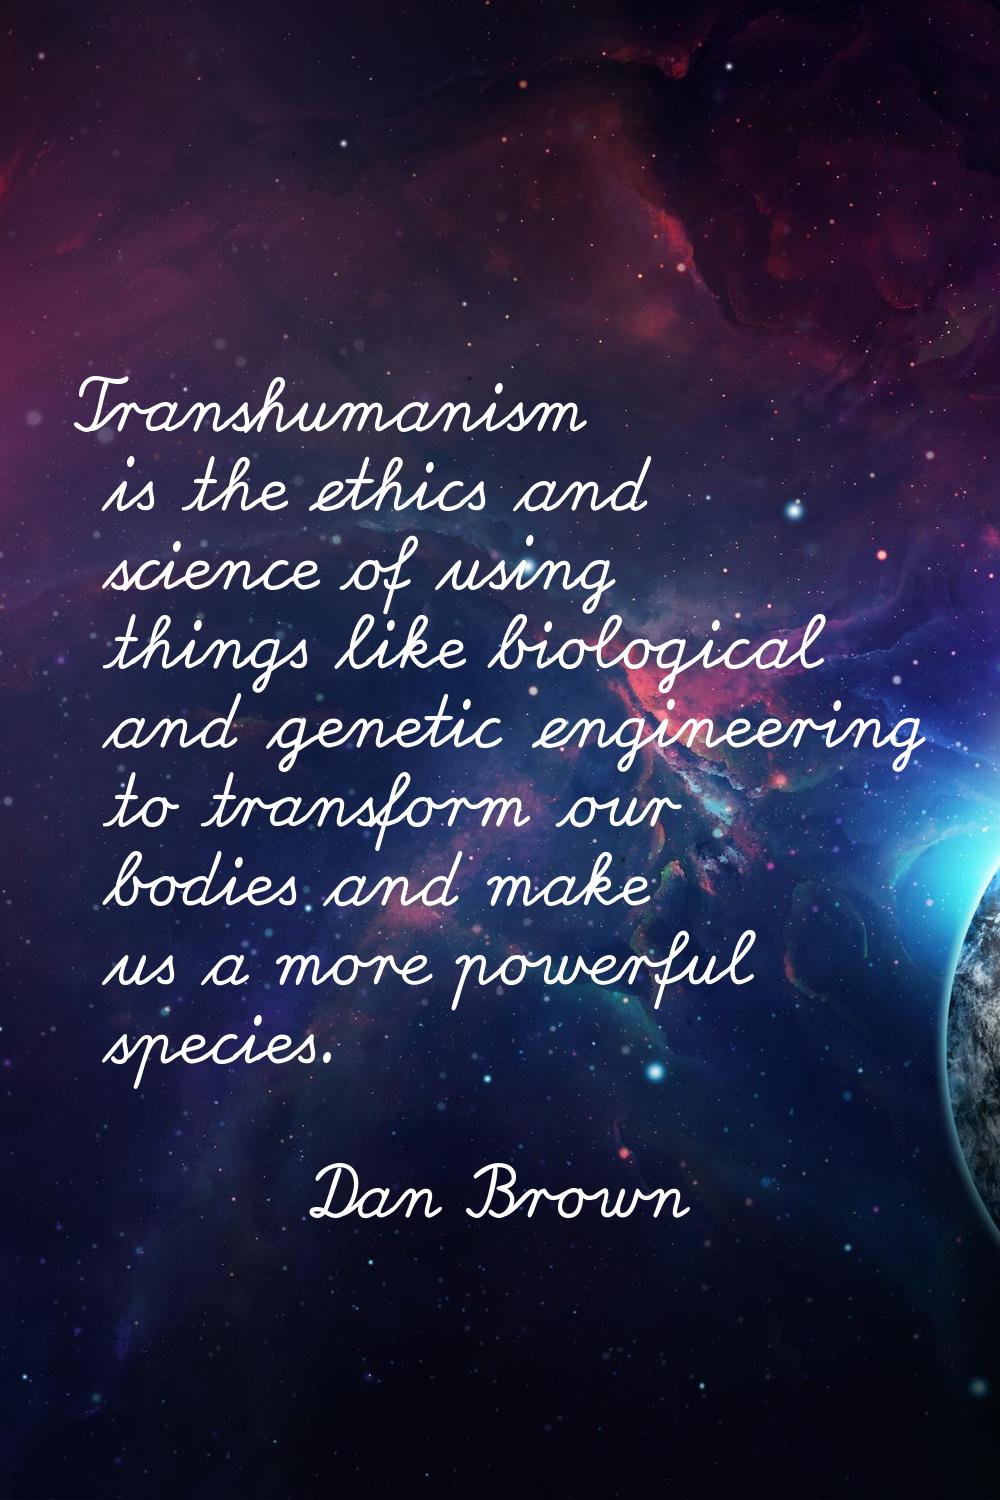 Transhumanism is the ethics and science of using things like biological and genetic engineering to 